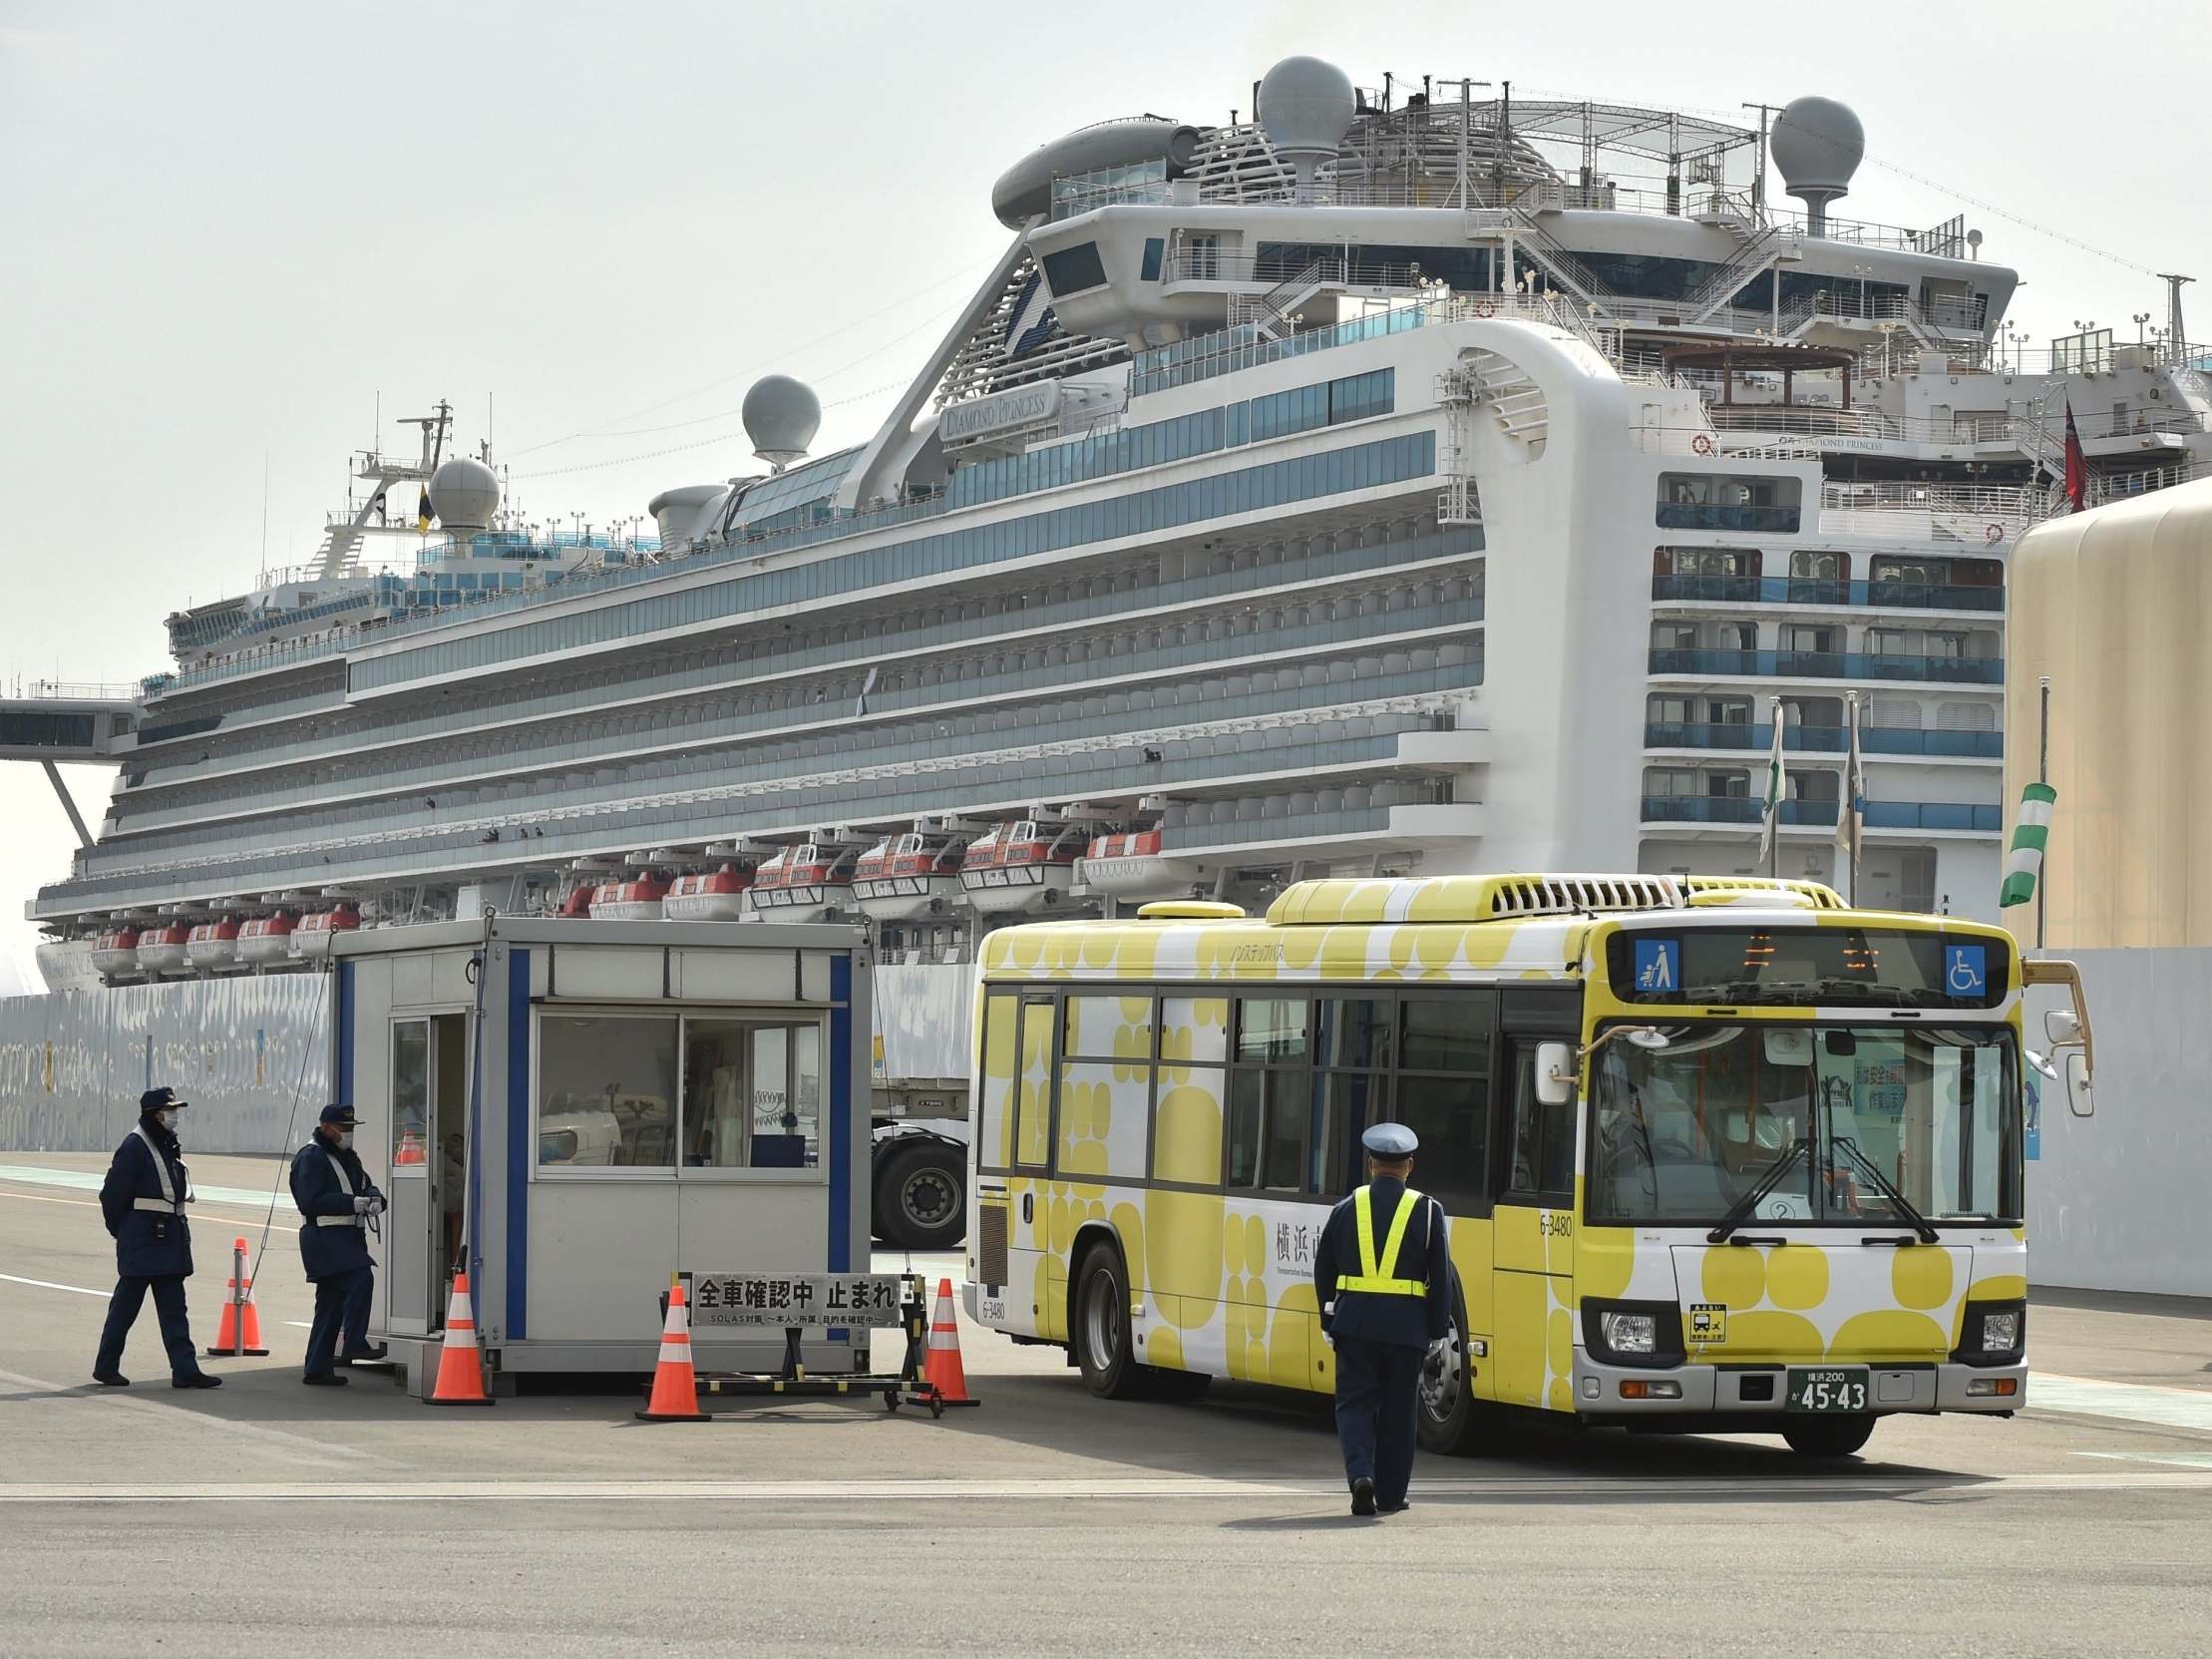 A bus carrying passengers who disembarked from the Diamond Princess cruise ship, which is in quarantine in Yokohama, Japan, following an outbreak of the new COVID-19 coronavirus, 20 February, 2020.